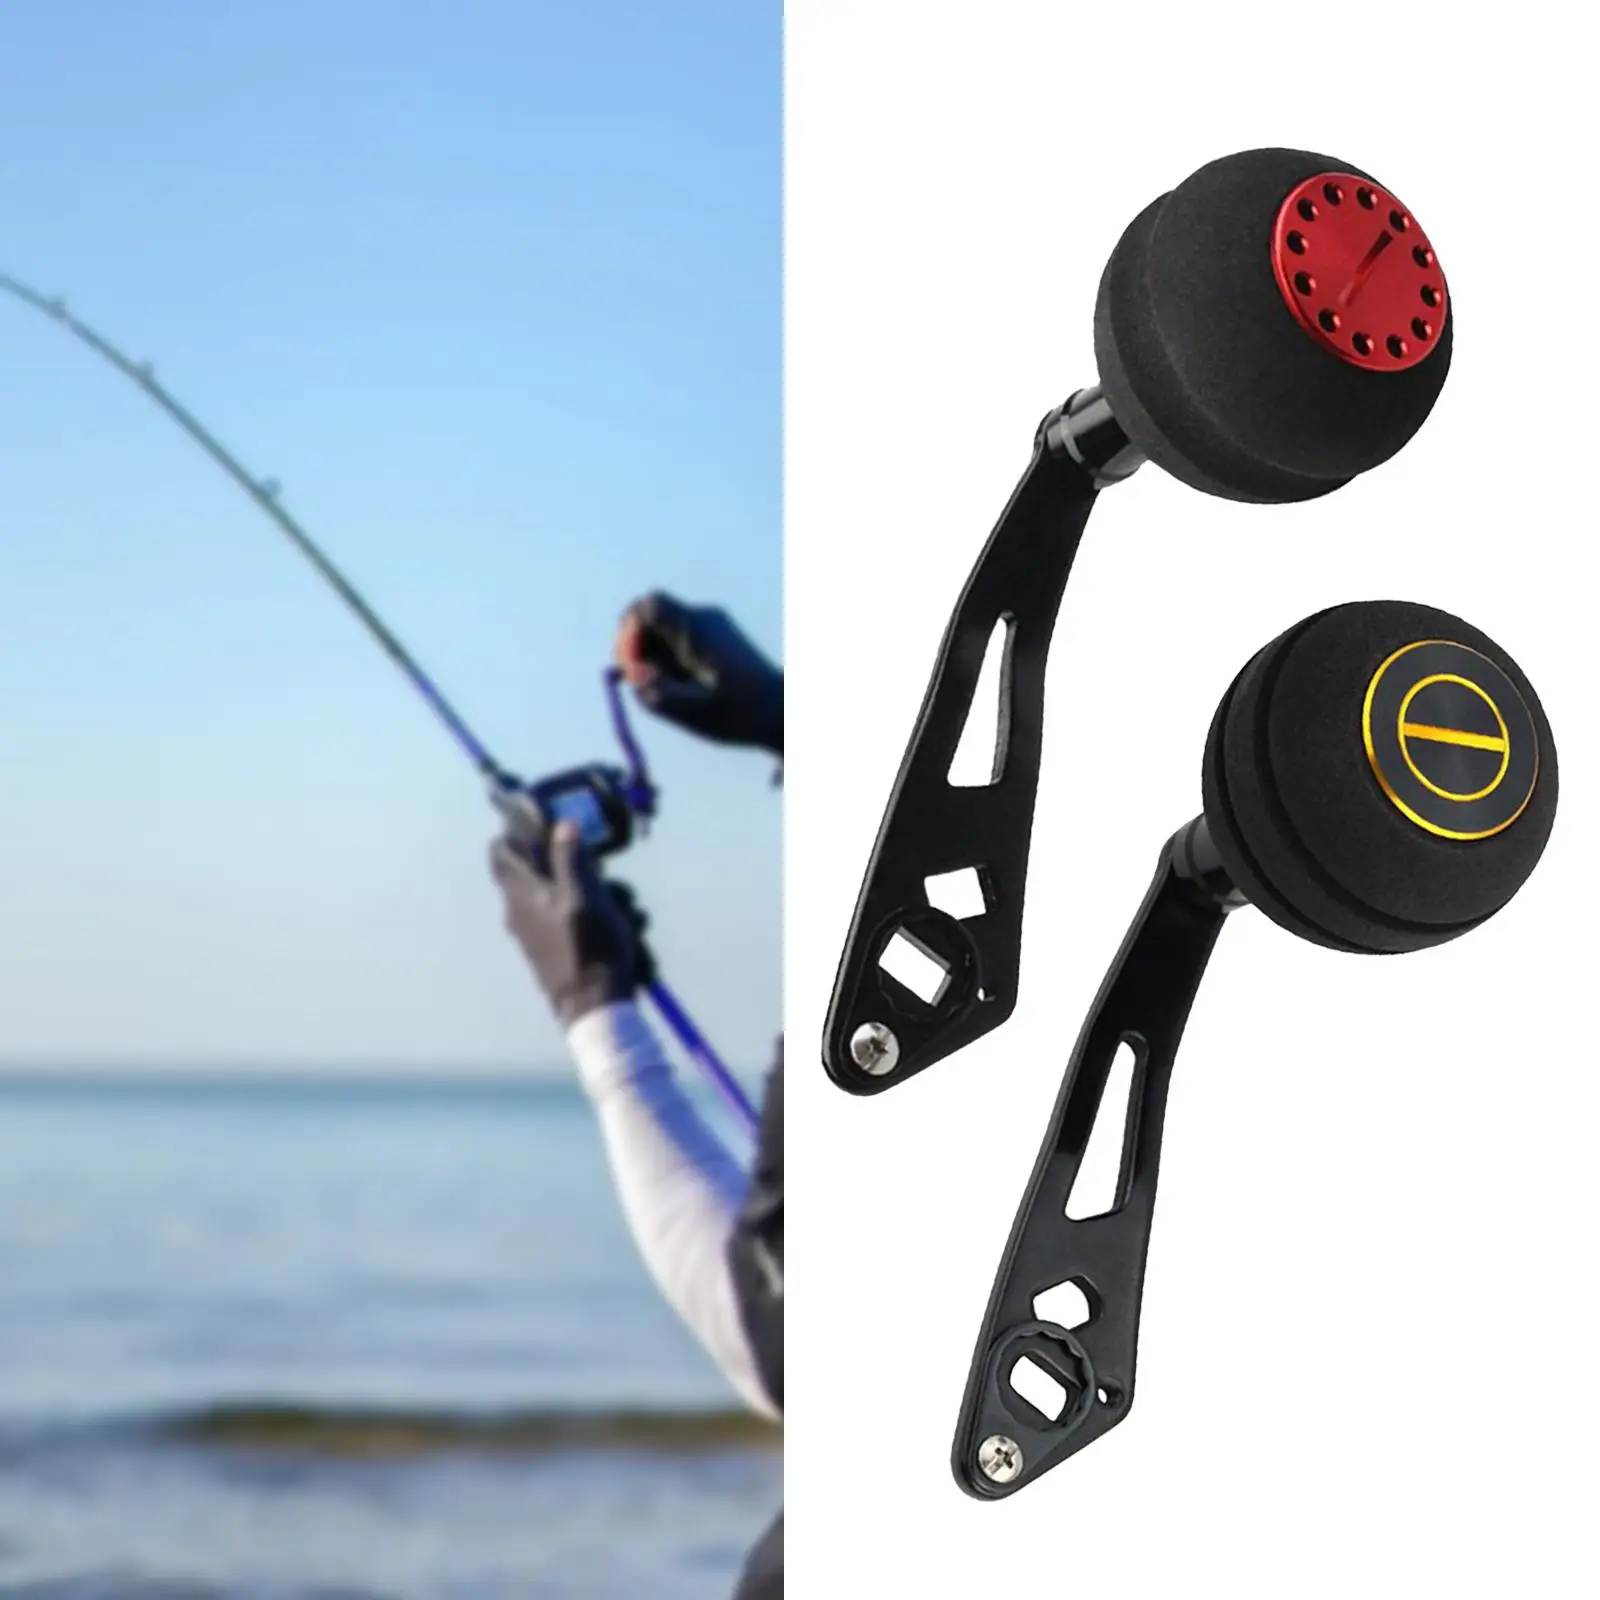 Fishing Reel Handle Fishing Reel Conversion Fishing Multifunction Parts Easy to Install Fishing Tackle Stable Fishing Reel Parts